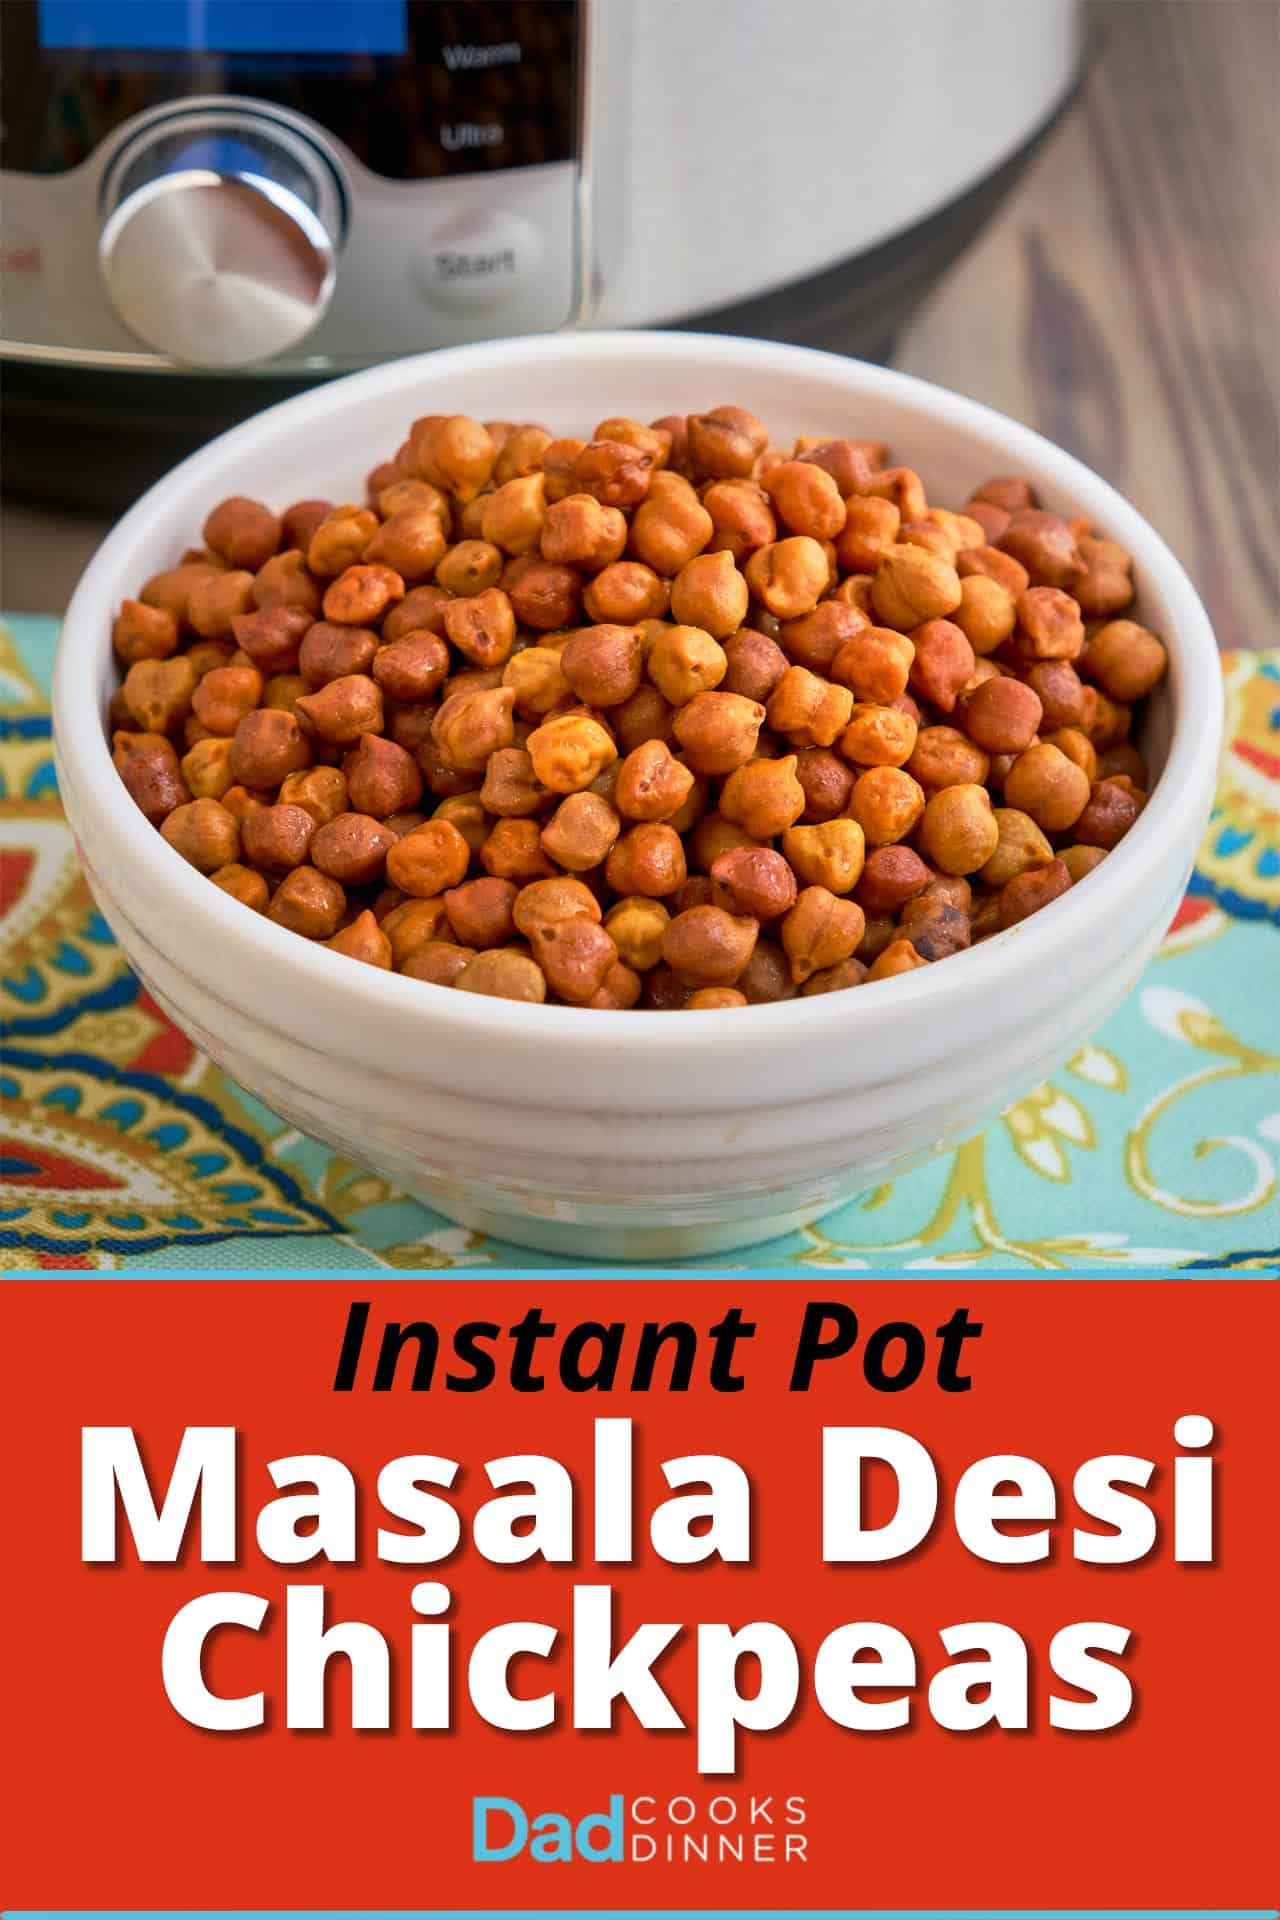 A bowl of desi chickpeas (Desi Chana) with an Instant Pot in the background